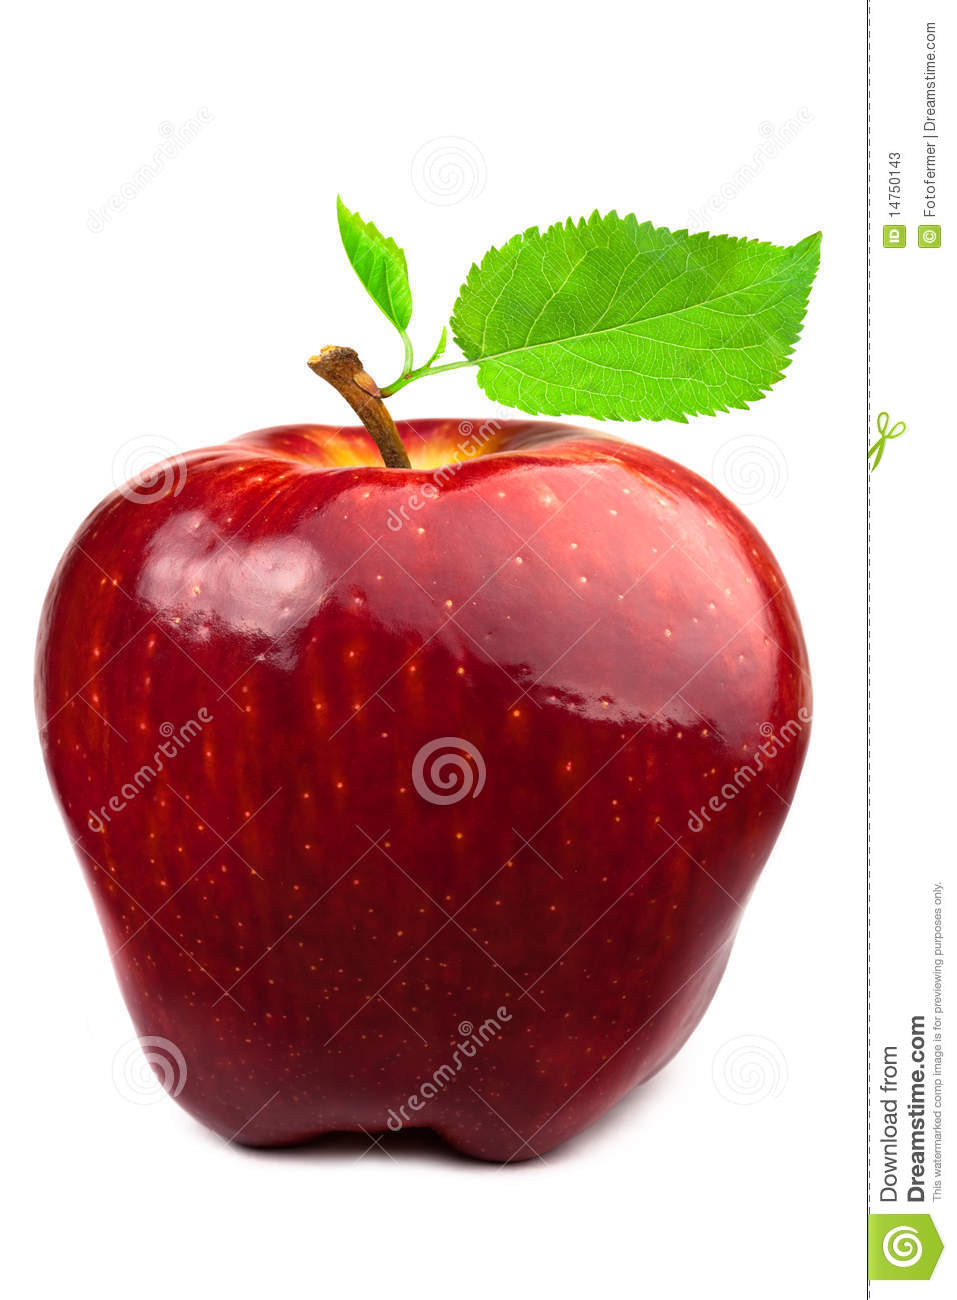 Dark Red Apple With Leaves Stock Photos   Image  14750143